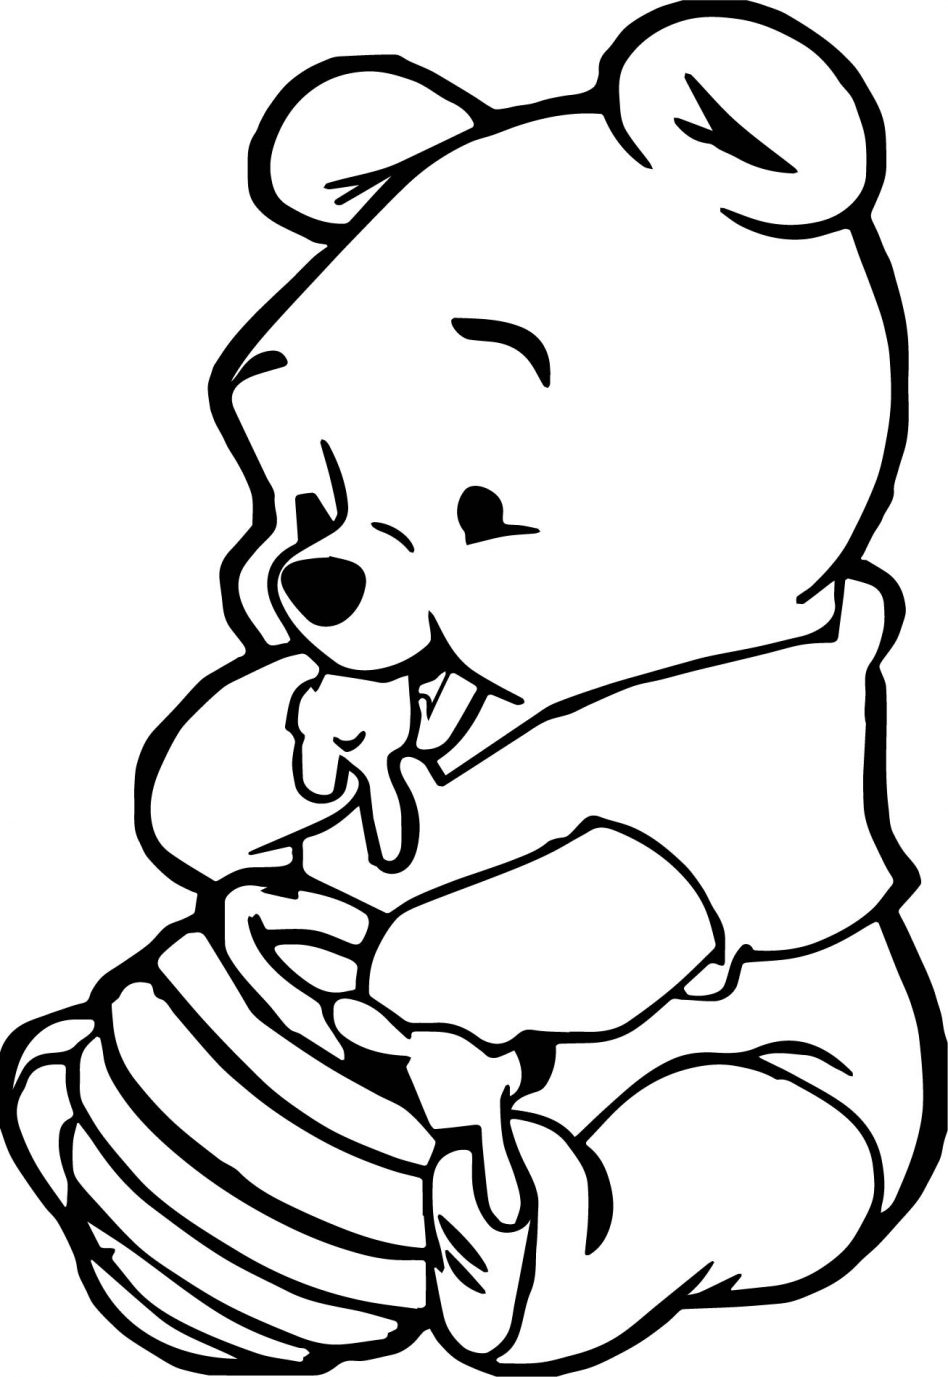 Baby Pooh Coloring Pages At Getcolorings Com Free Printable Colorings